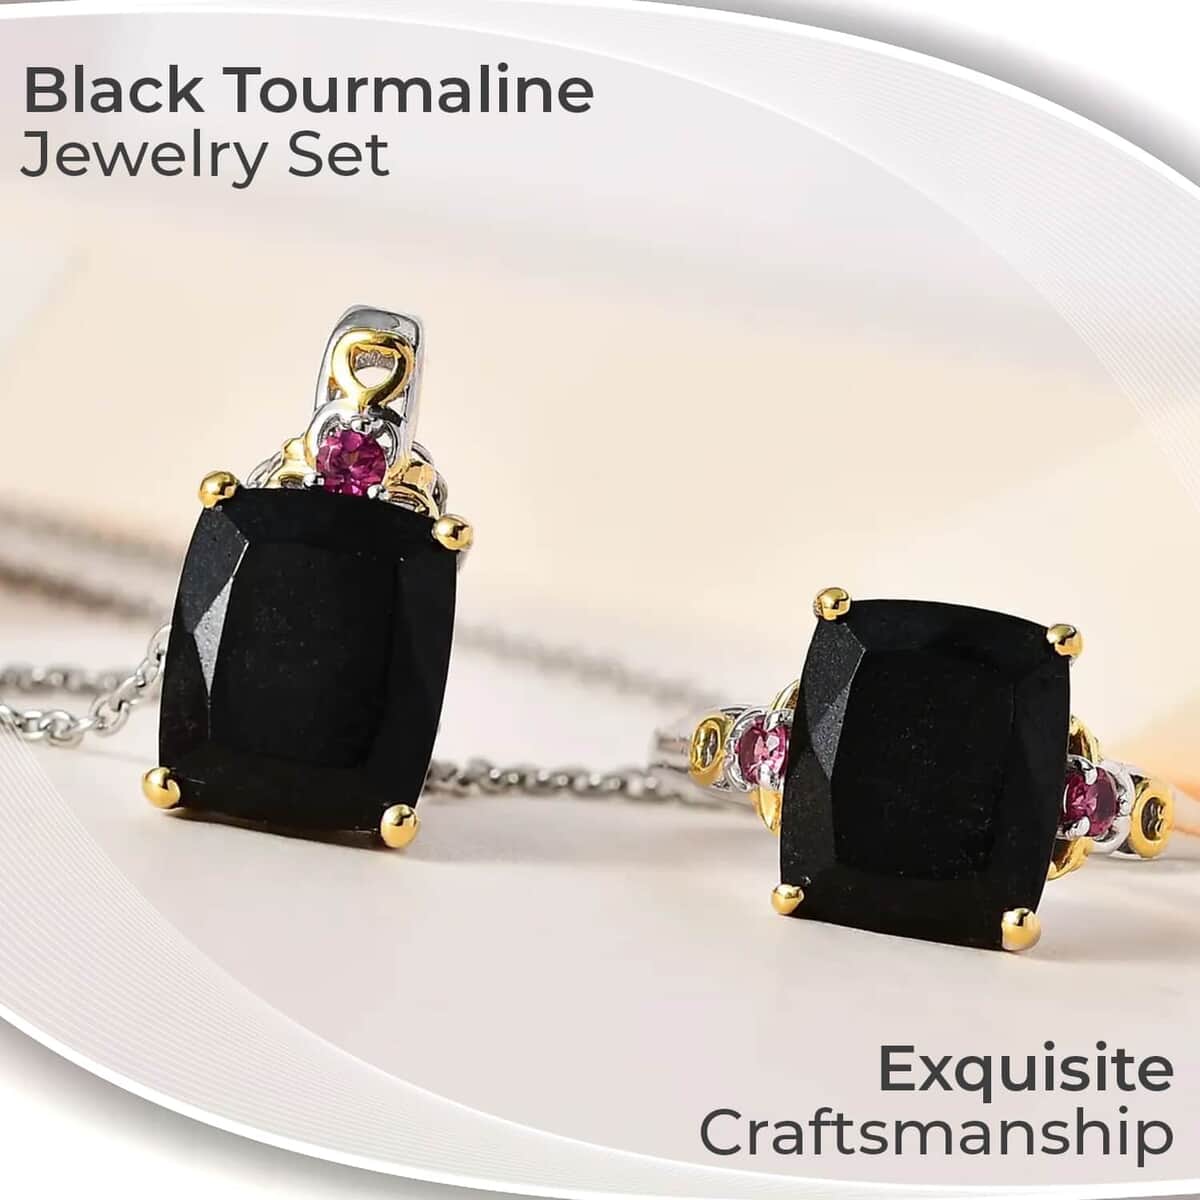 Black Tourmaline and Orissa Rhodolite Garnet Accent 12.35 ctw Jewelry Set, Set of Tourmaline Ring (Size 10.00) and Tourmaline Pendant Necklace, 20 Inch Necklace, Vermeil YG and Platinum Over Sterling Silver Jewelry Set image number 1